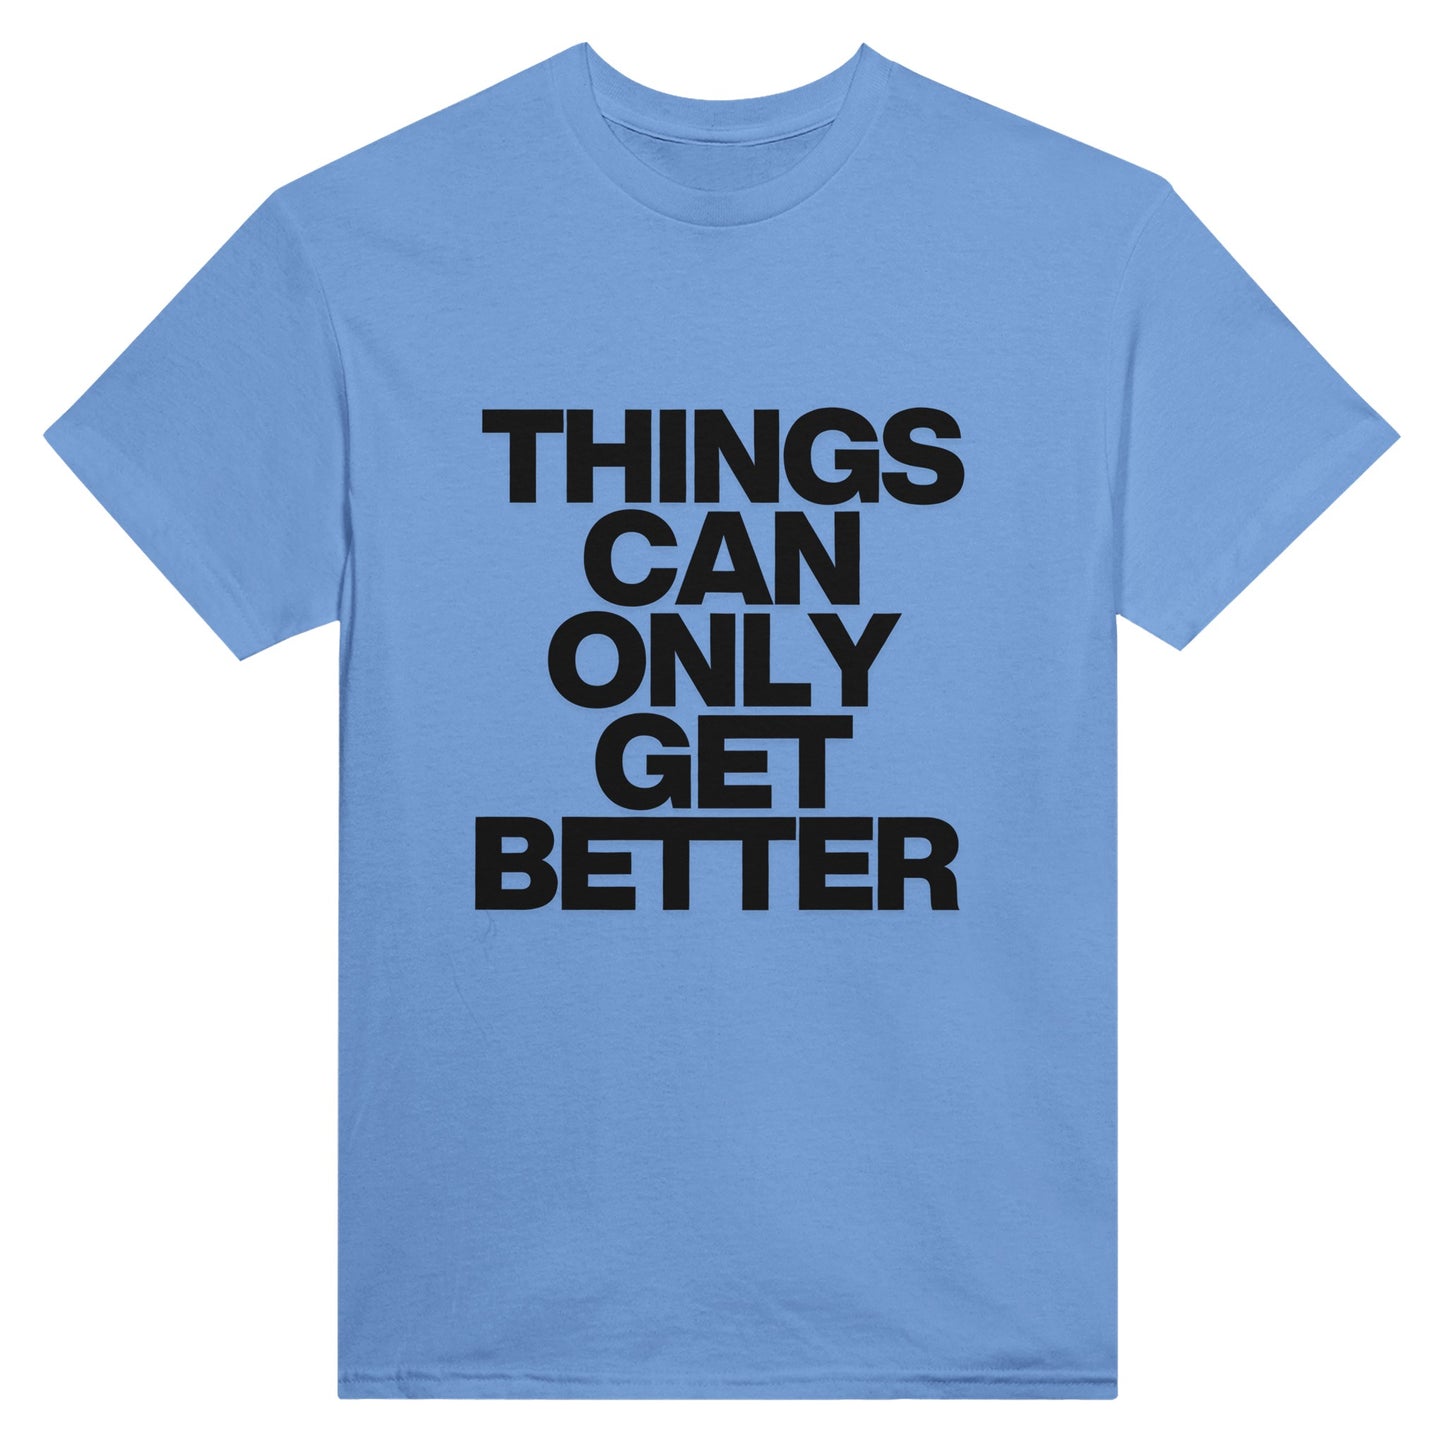 Things Can Only Get Better T-shirt in blue - anti-tory election wear